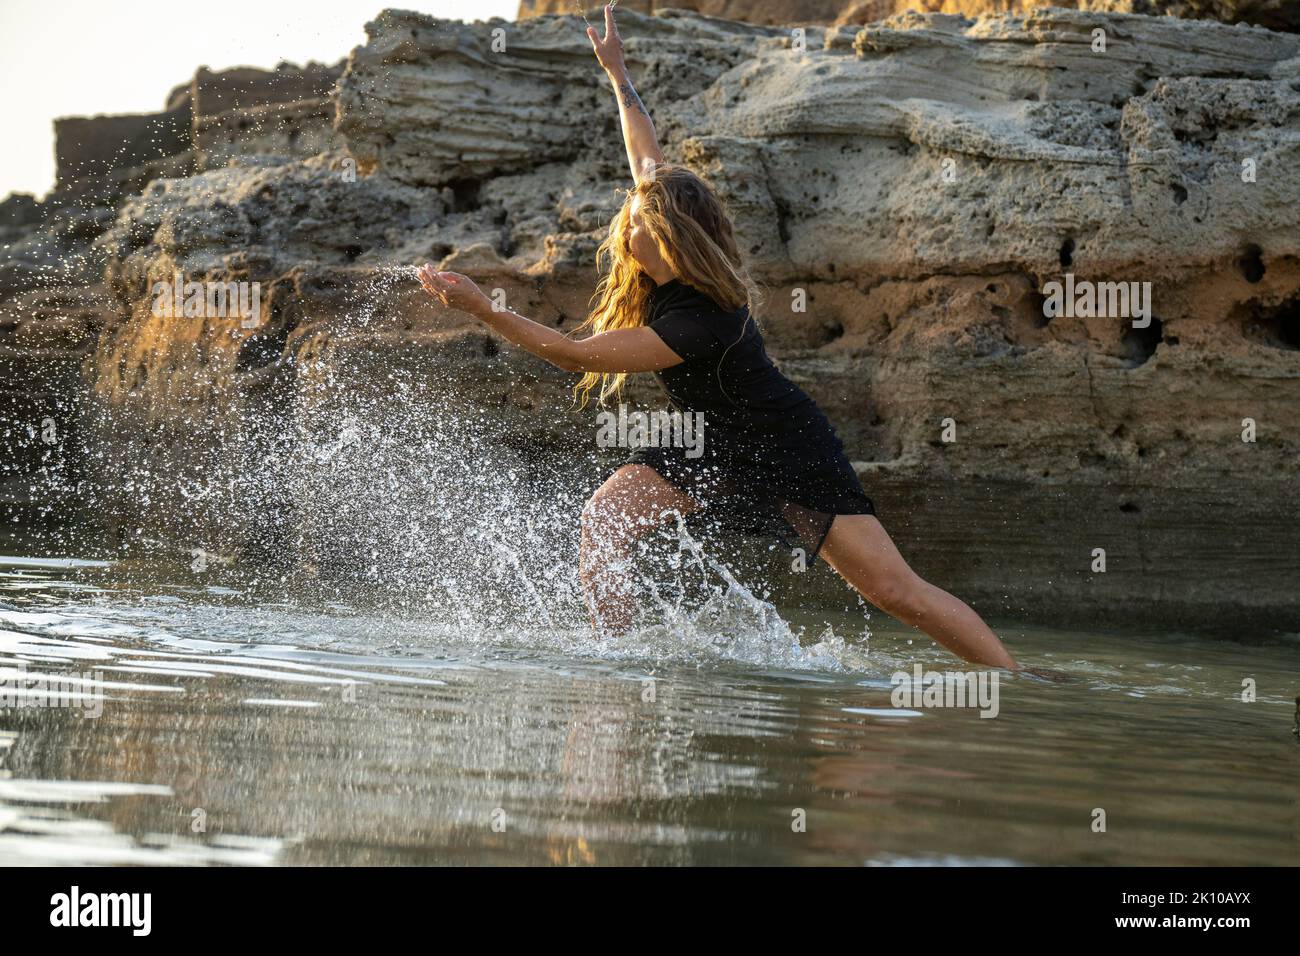 middle-aged woman dancing and throwing water in the air, Maioris beach, llucmajor, Majorca, Balearic Islands, Spain Stock Photo